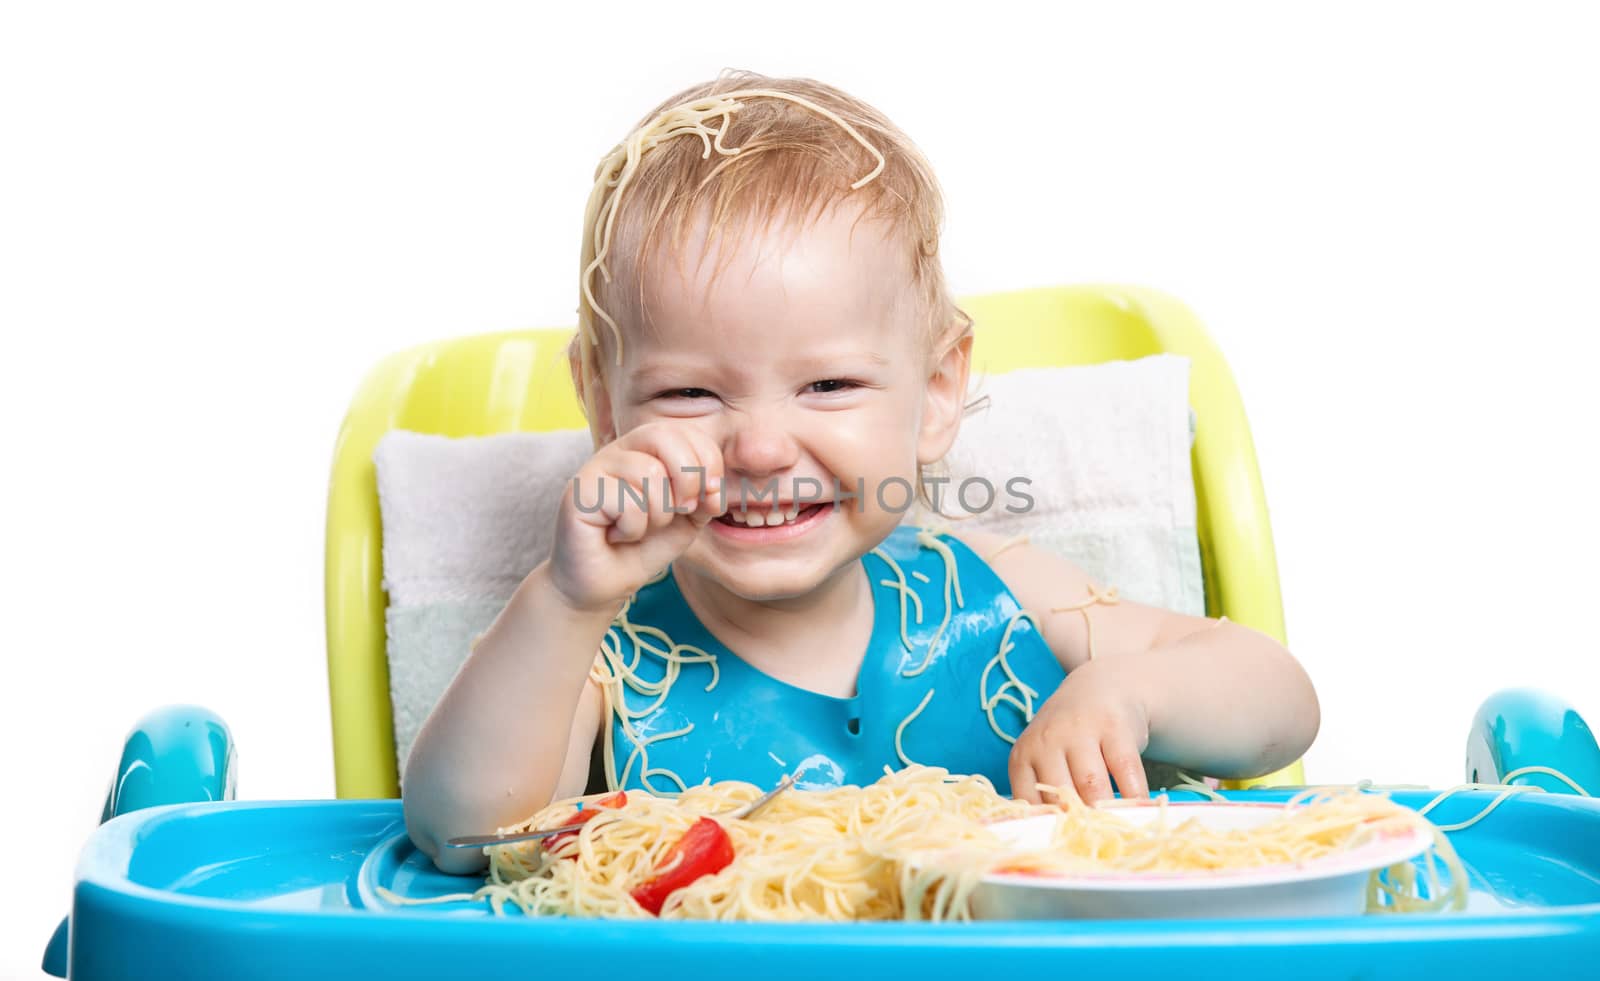 Little boy eating spaghetti and laughing by photobac